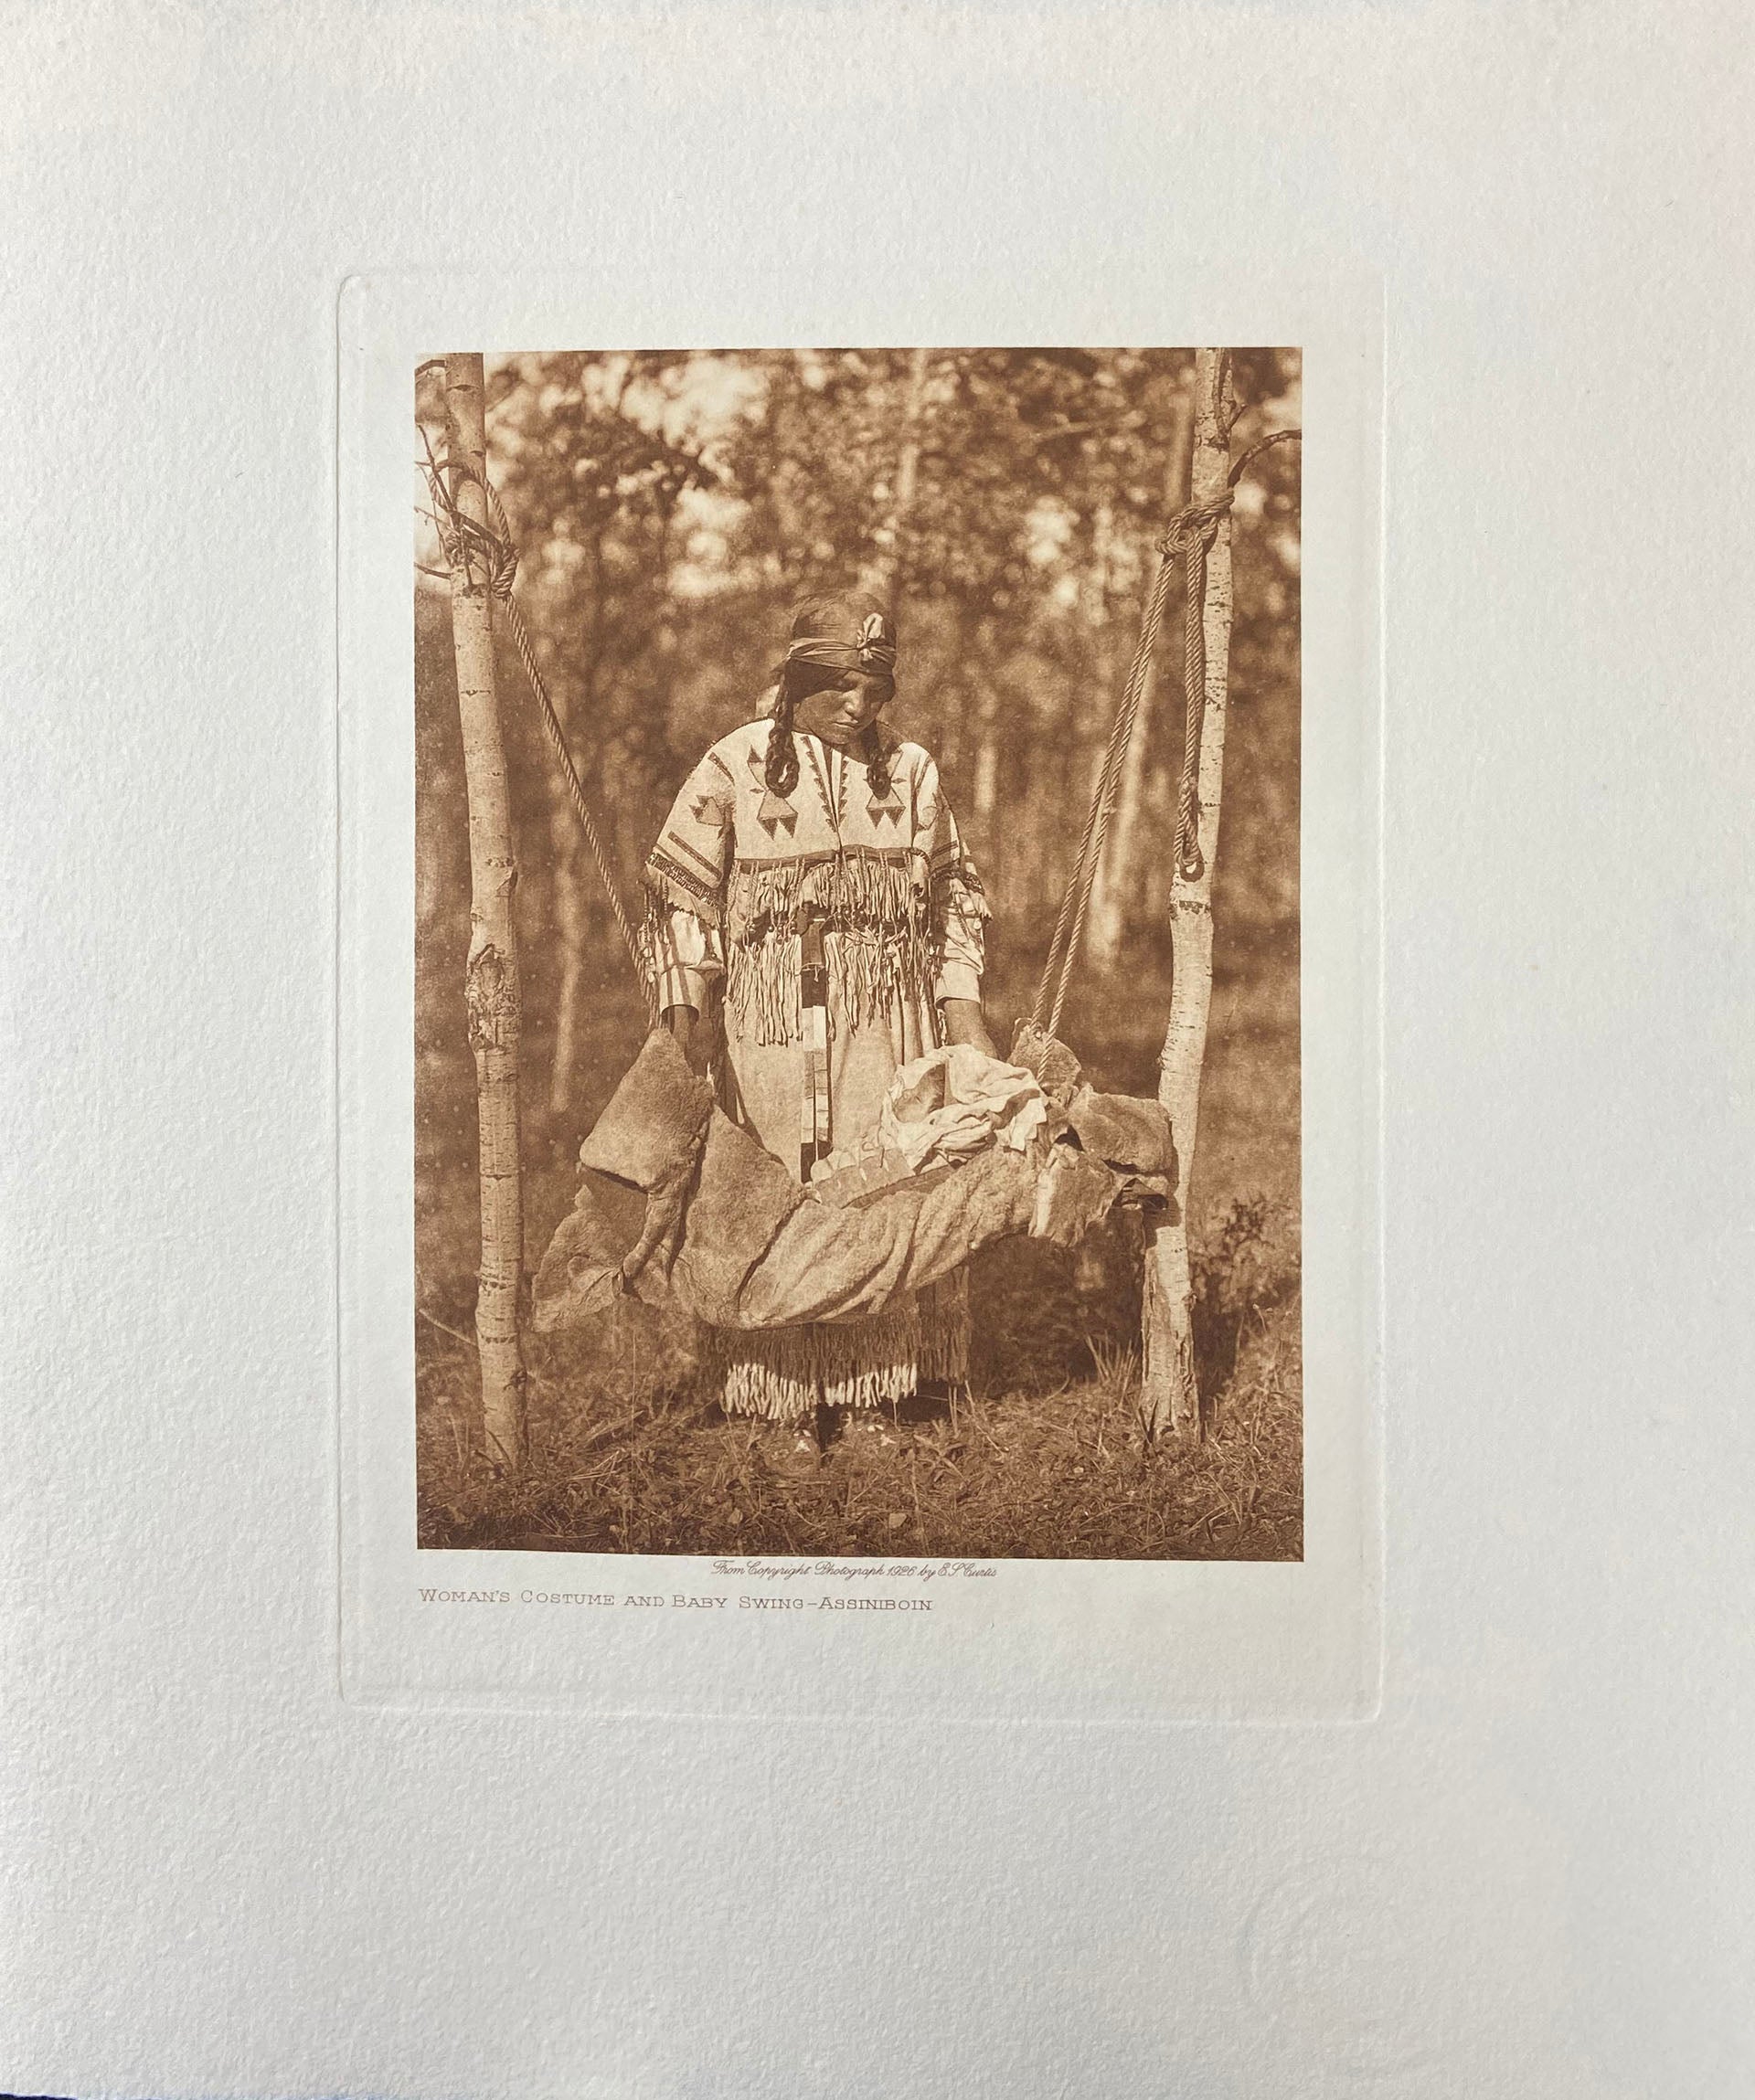 Woman's Costume and Baby Swing - Assiniboin